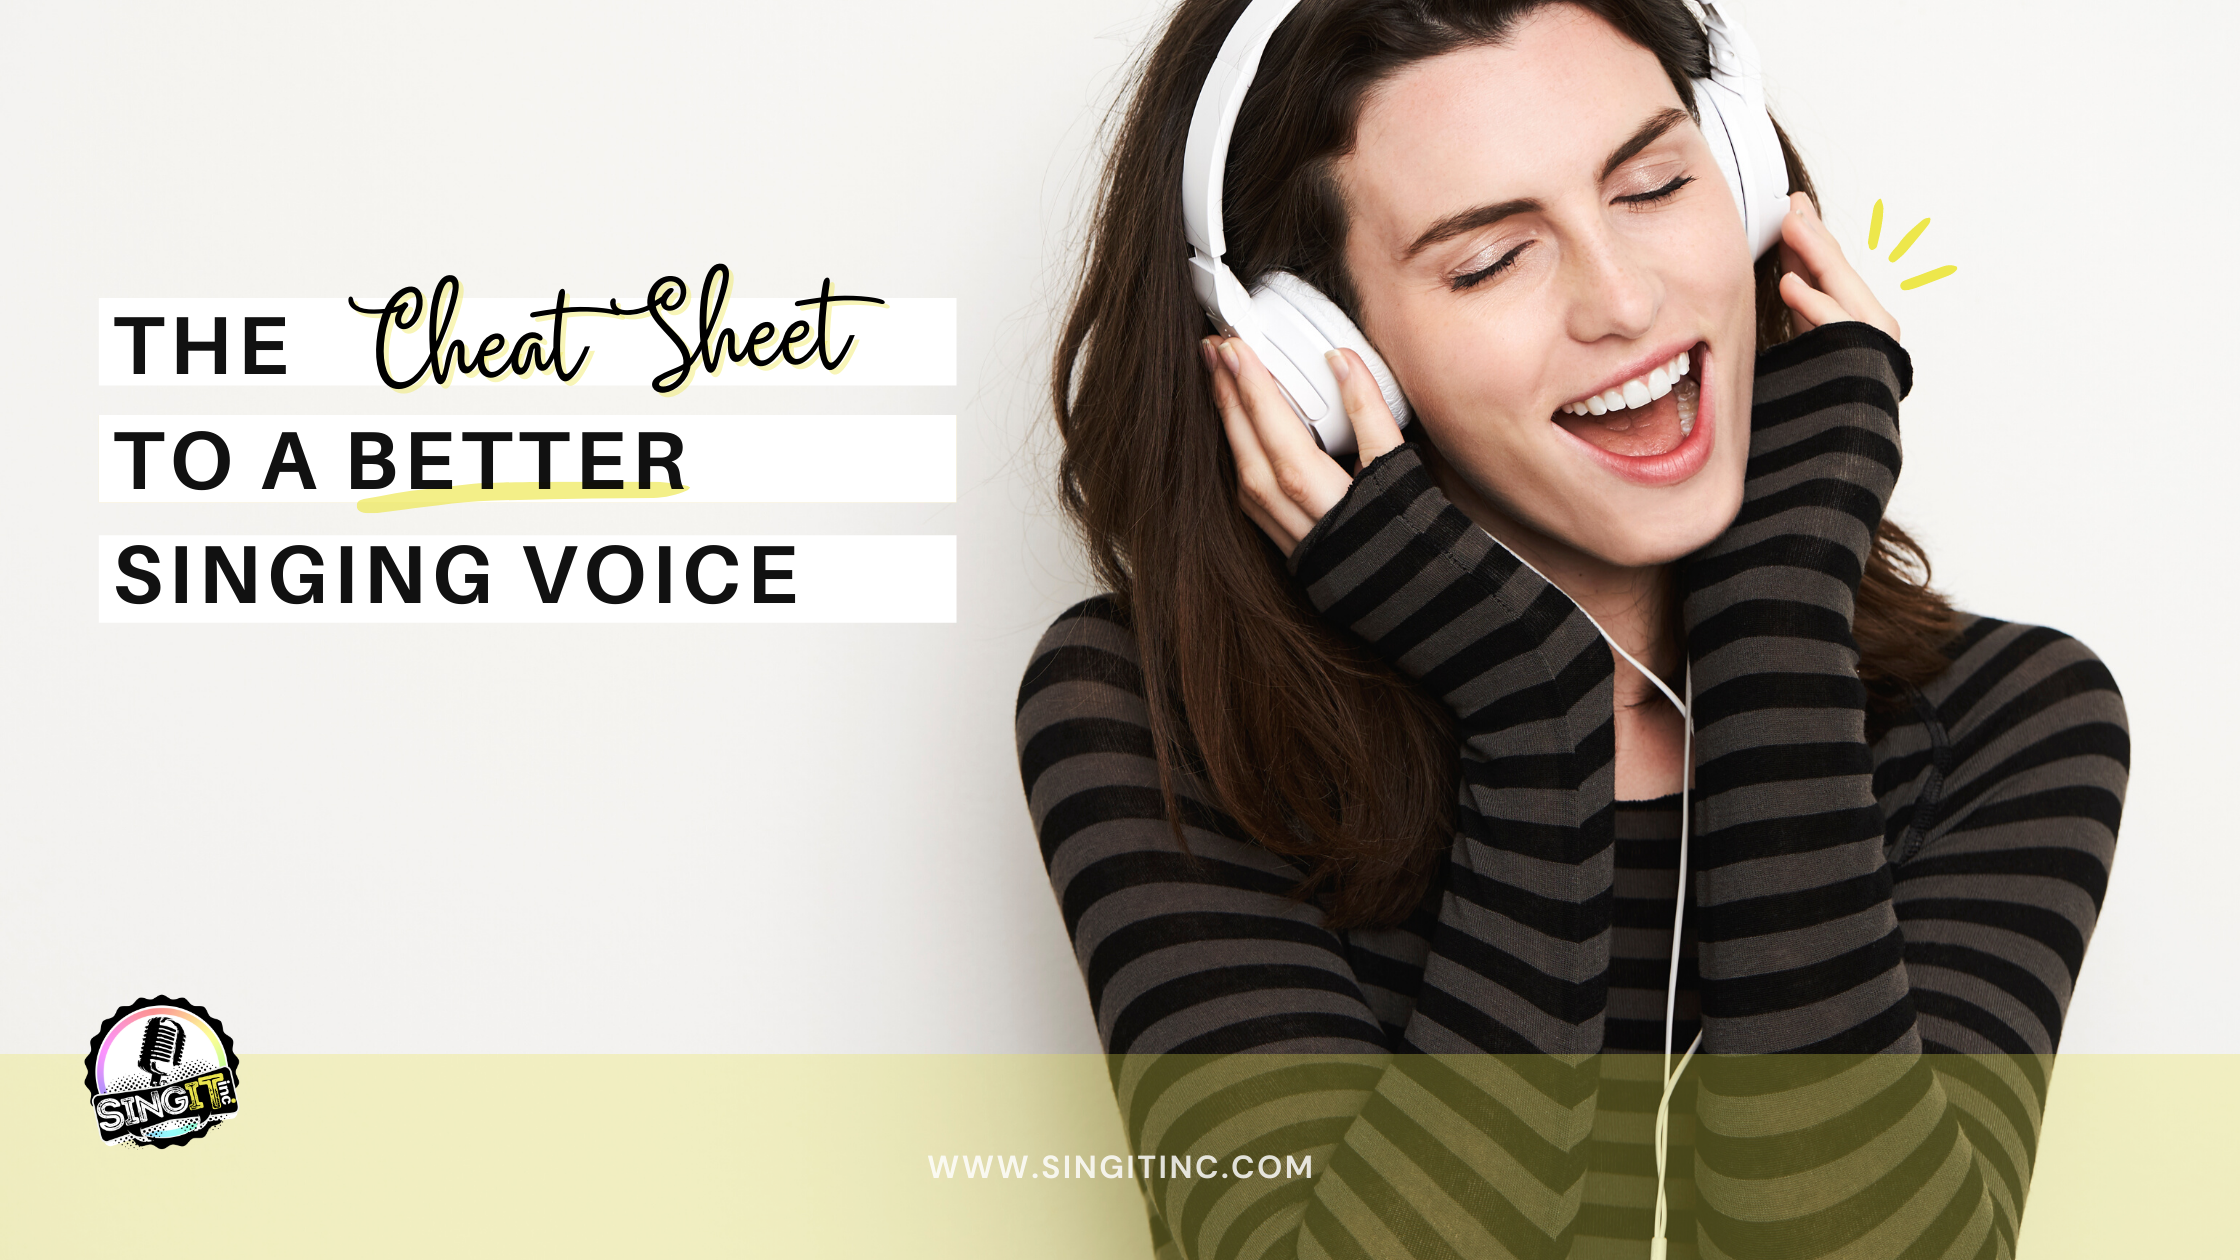 Cheat Sheet to a better singing voice